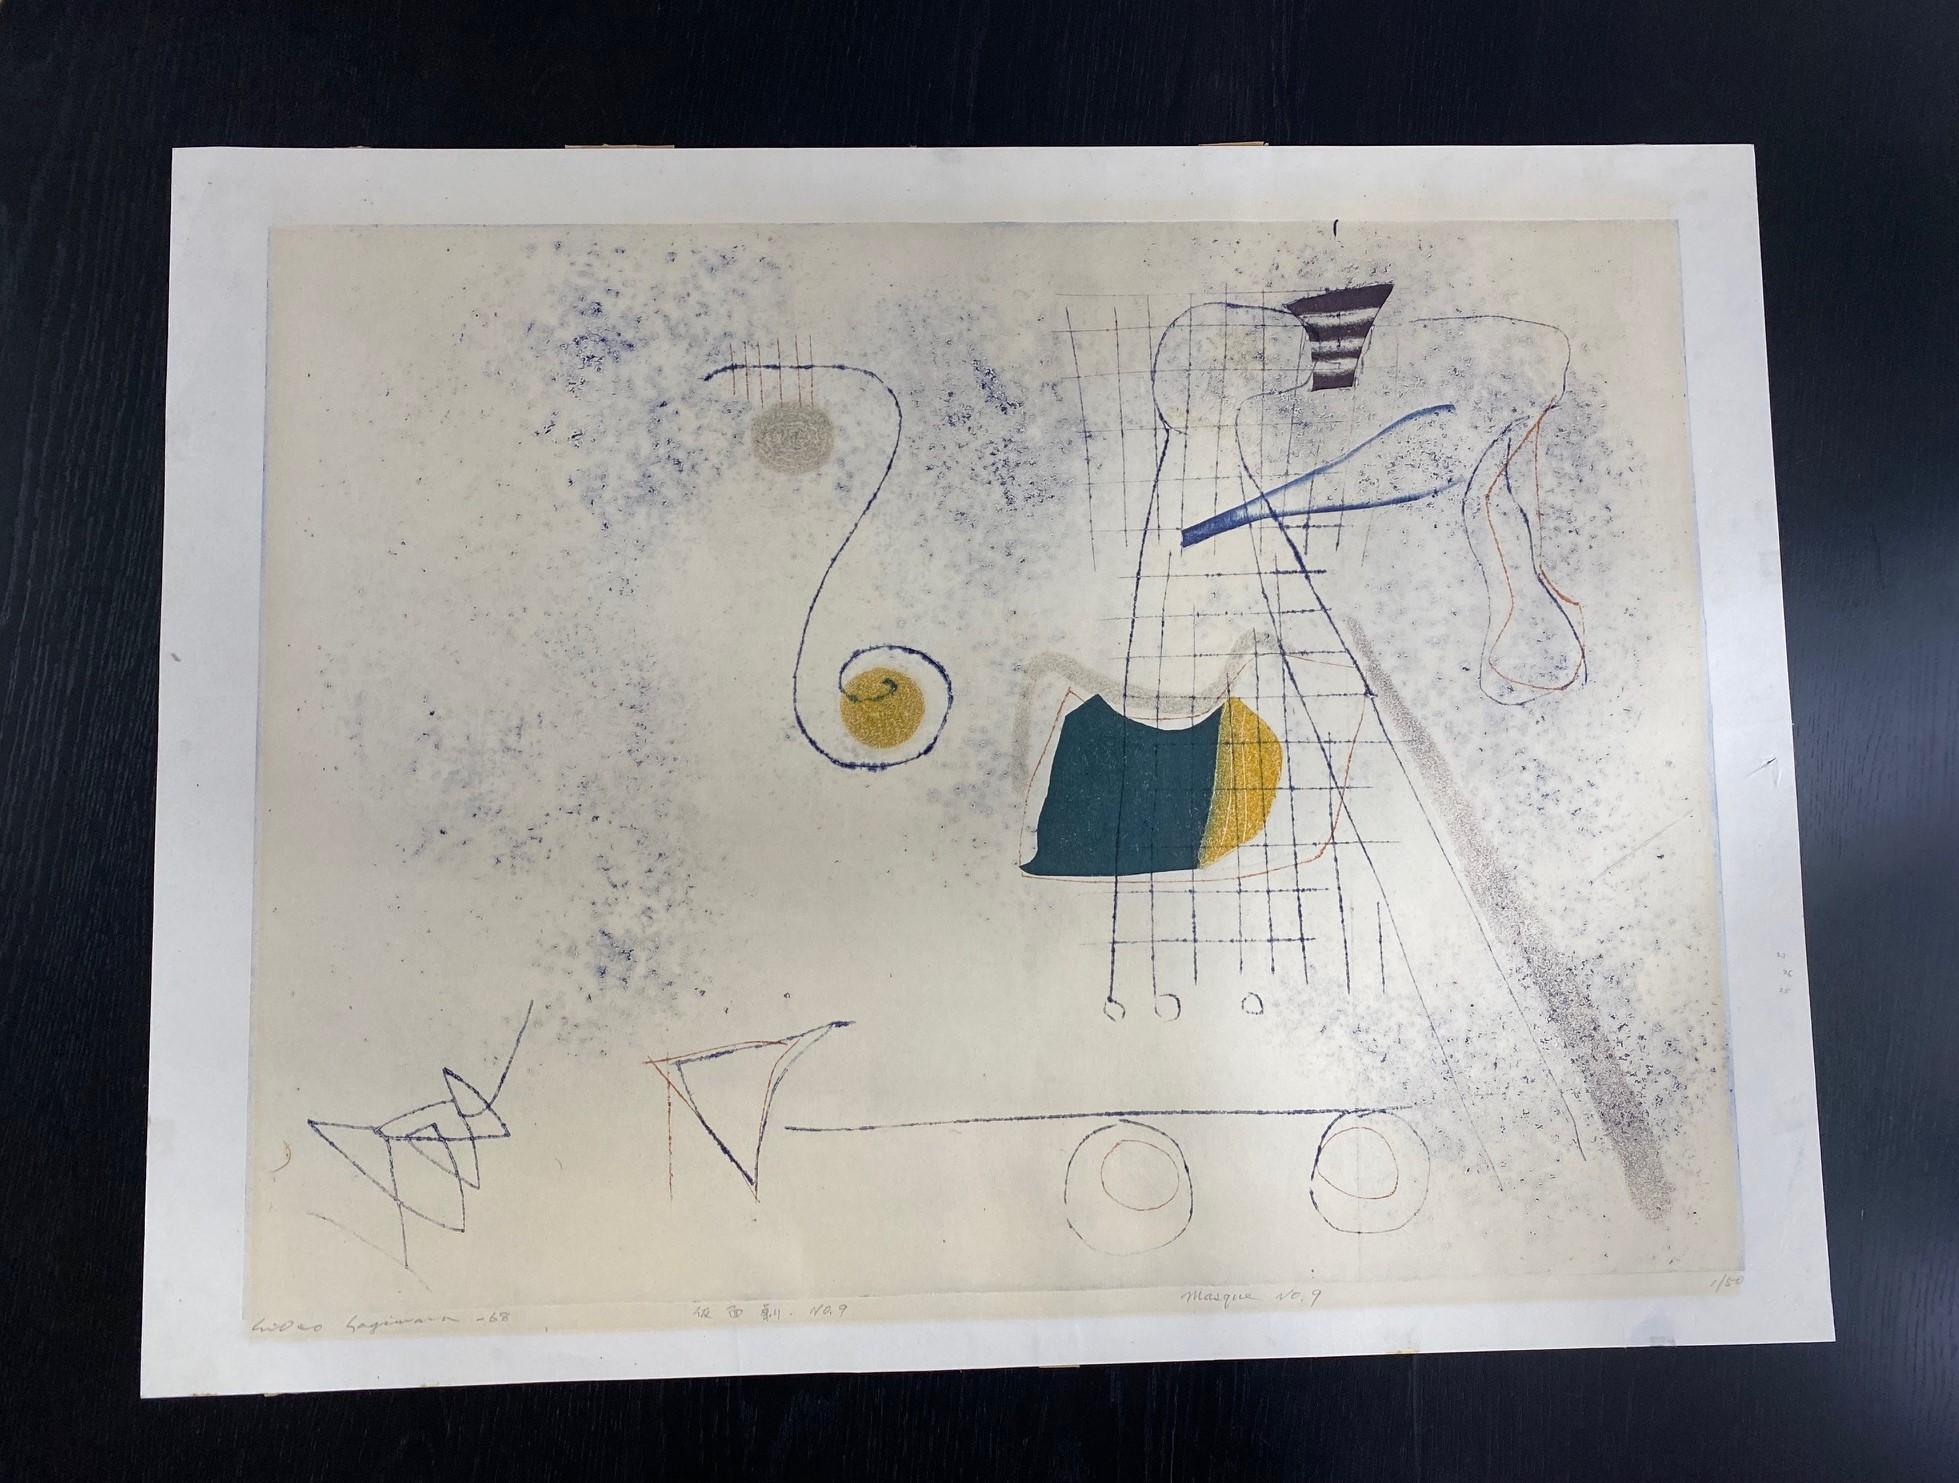 Wonderful large abstract print by famed Japanese master printer Hideo Hagiwara who was generally considered one of the finest post-World War II Sosaku Hanga artists. In 1989 he was awarded a Gold Medal by the Nobel Prize Committee for five works